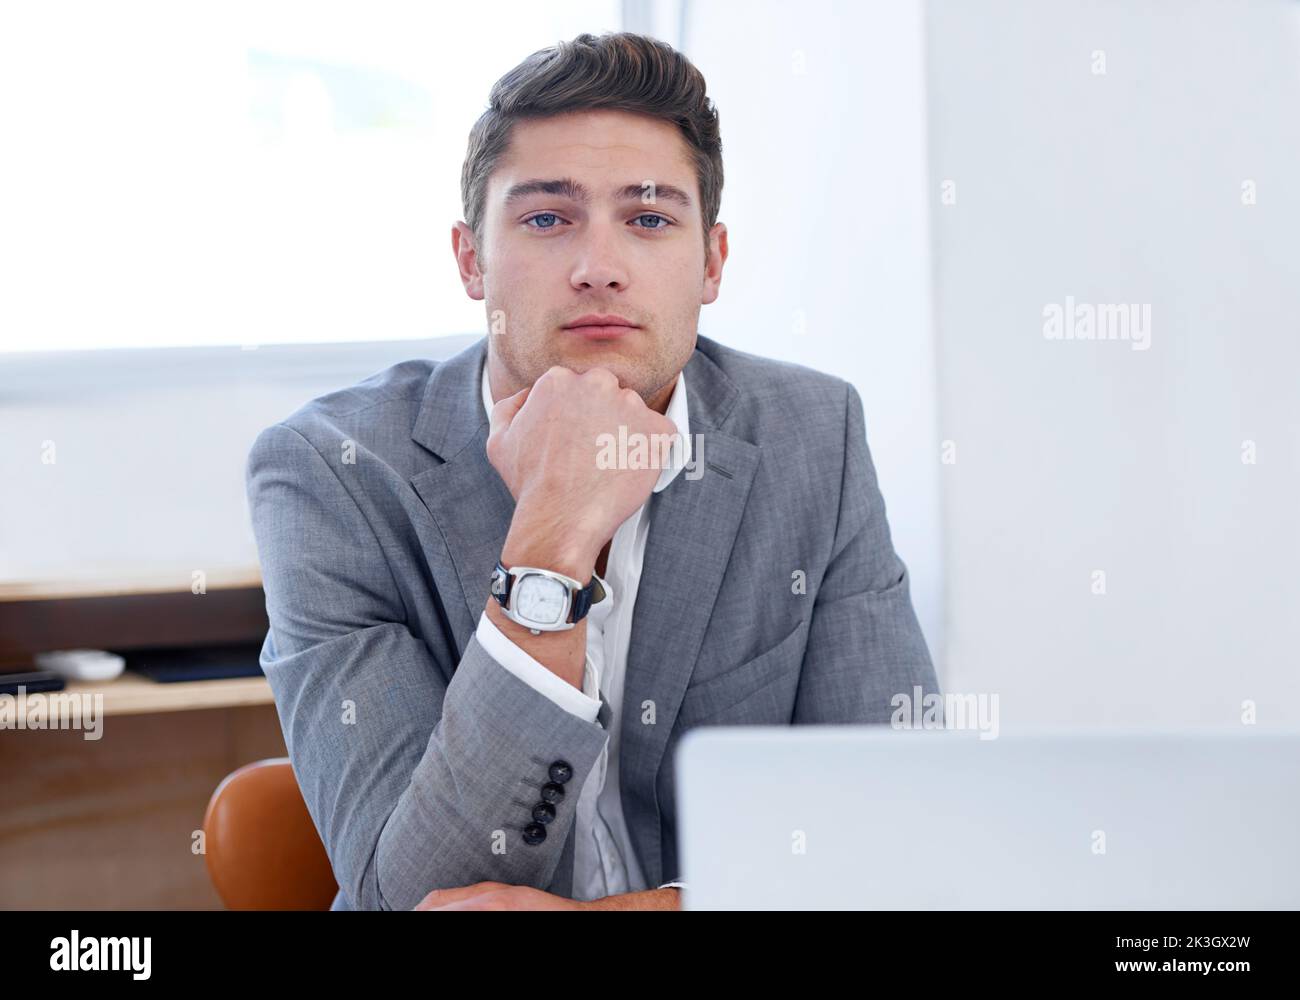 Arrogant boss. A serious young businessman looking thoughtful at his desk. Stock Photo